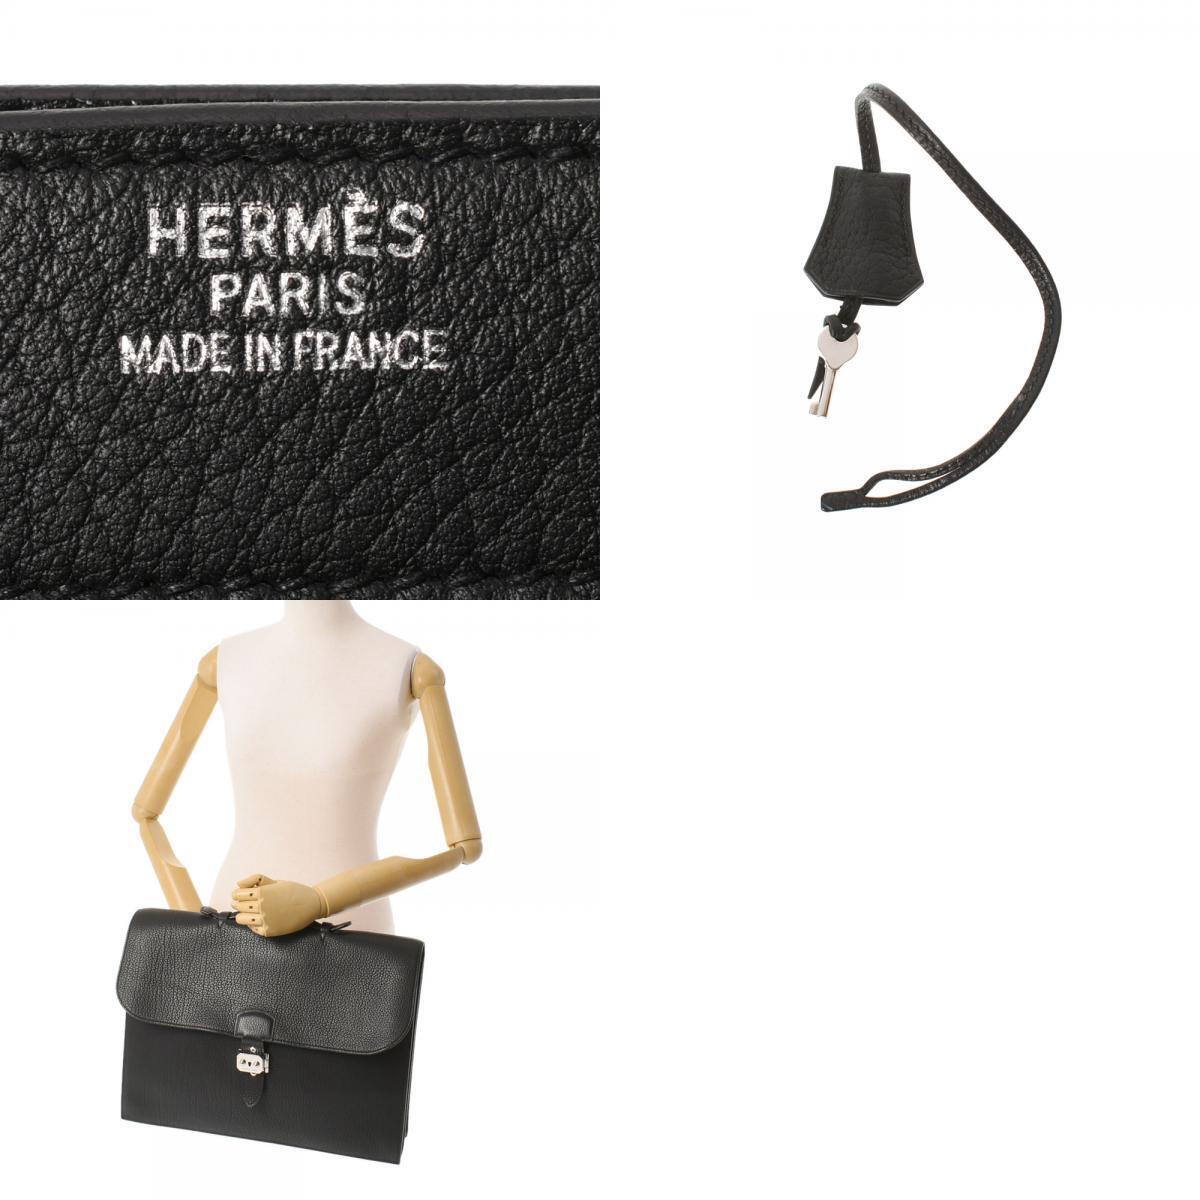 Hermes Sac à Dépêches Briefcase Bag Reference Guide - Spotted Fashion